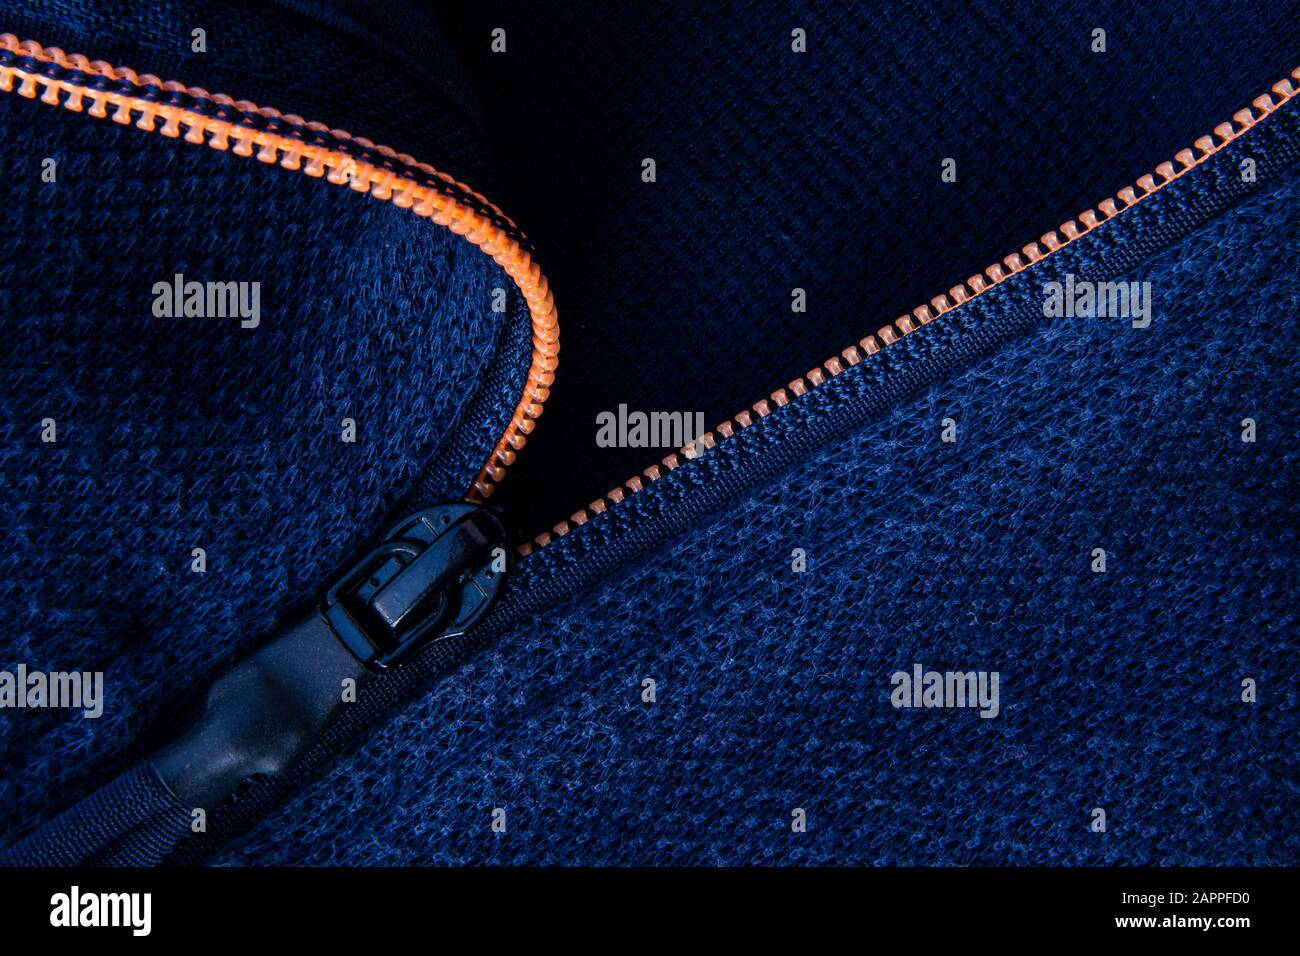 Ready made garments men's jacket zipper closure close up with blue ...